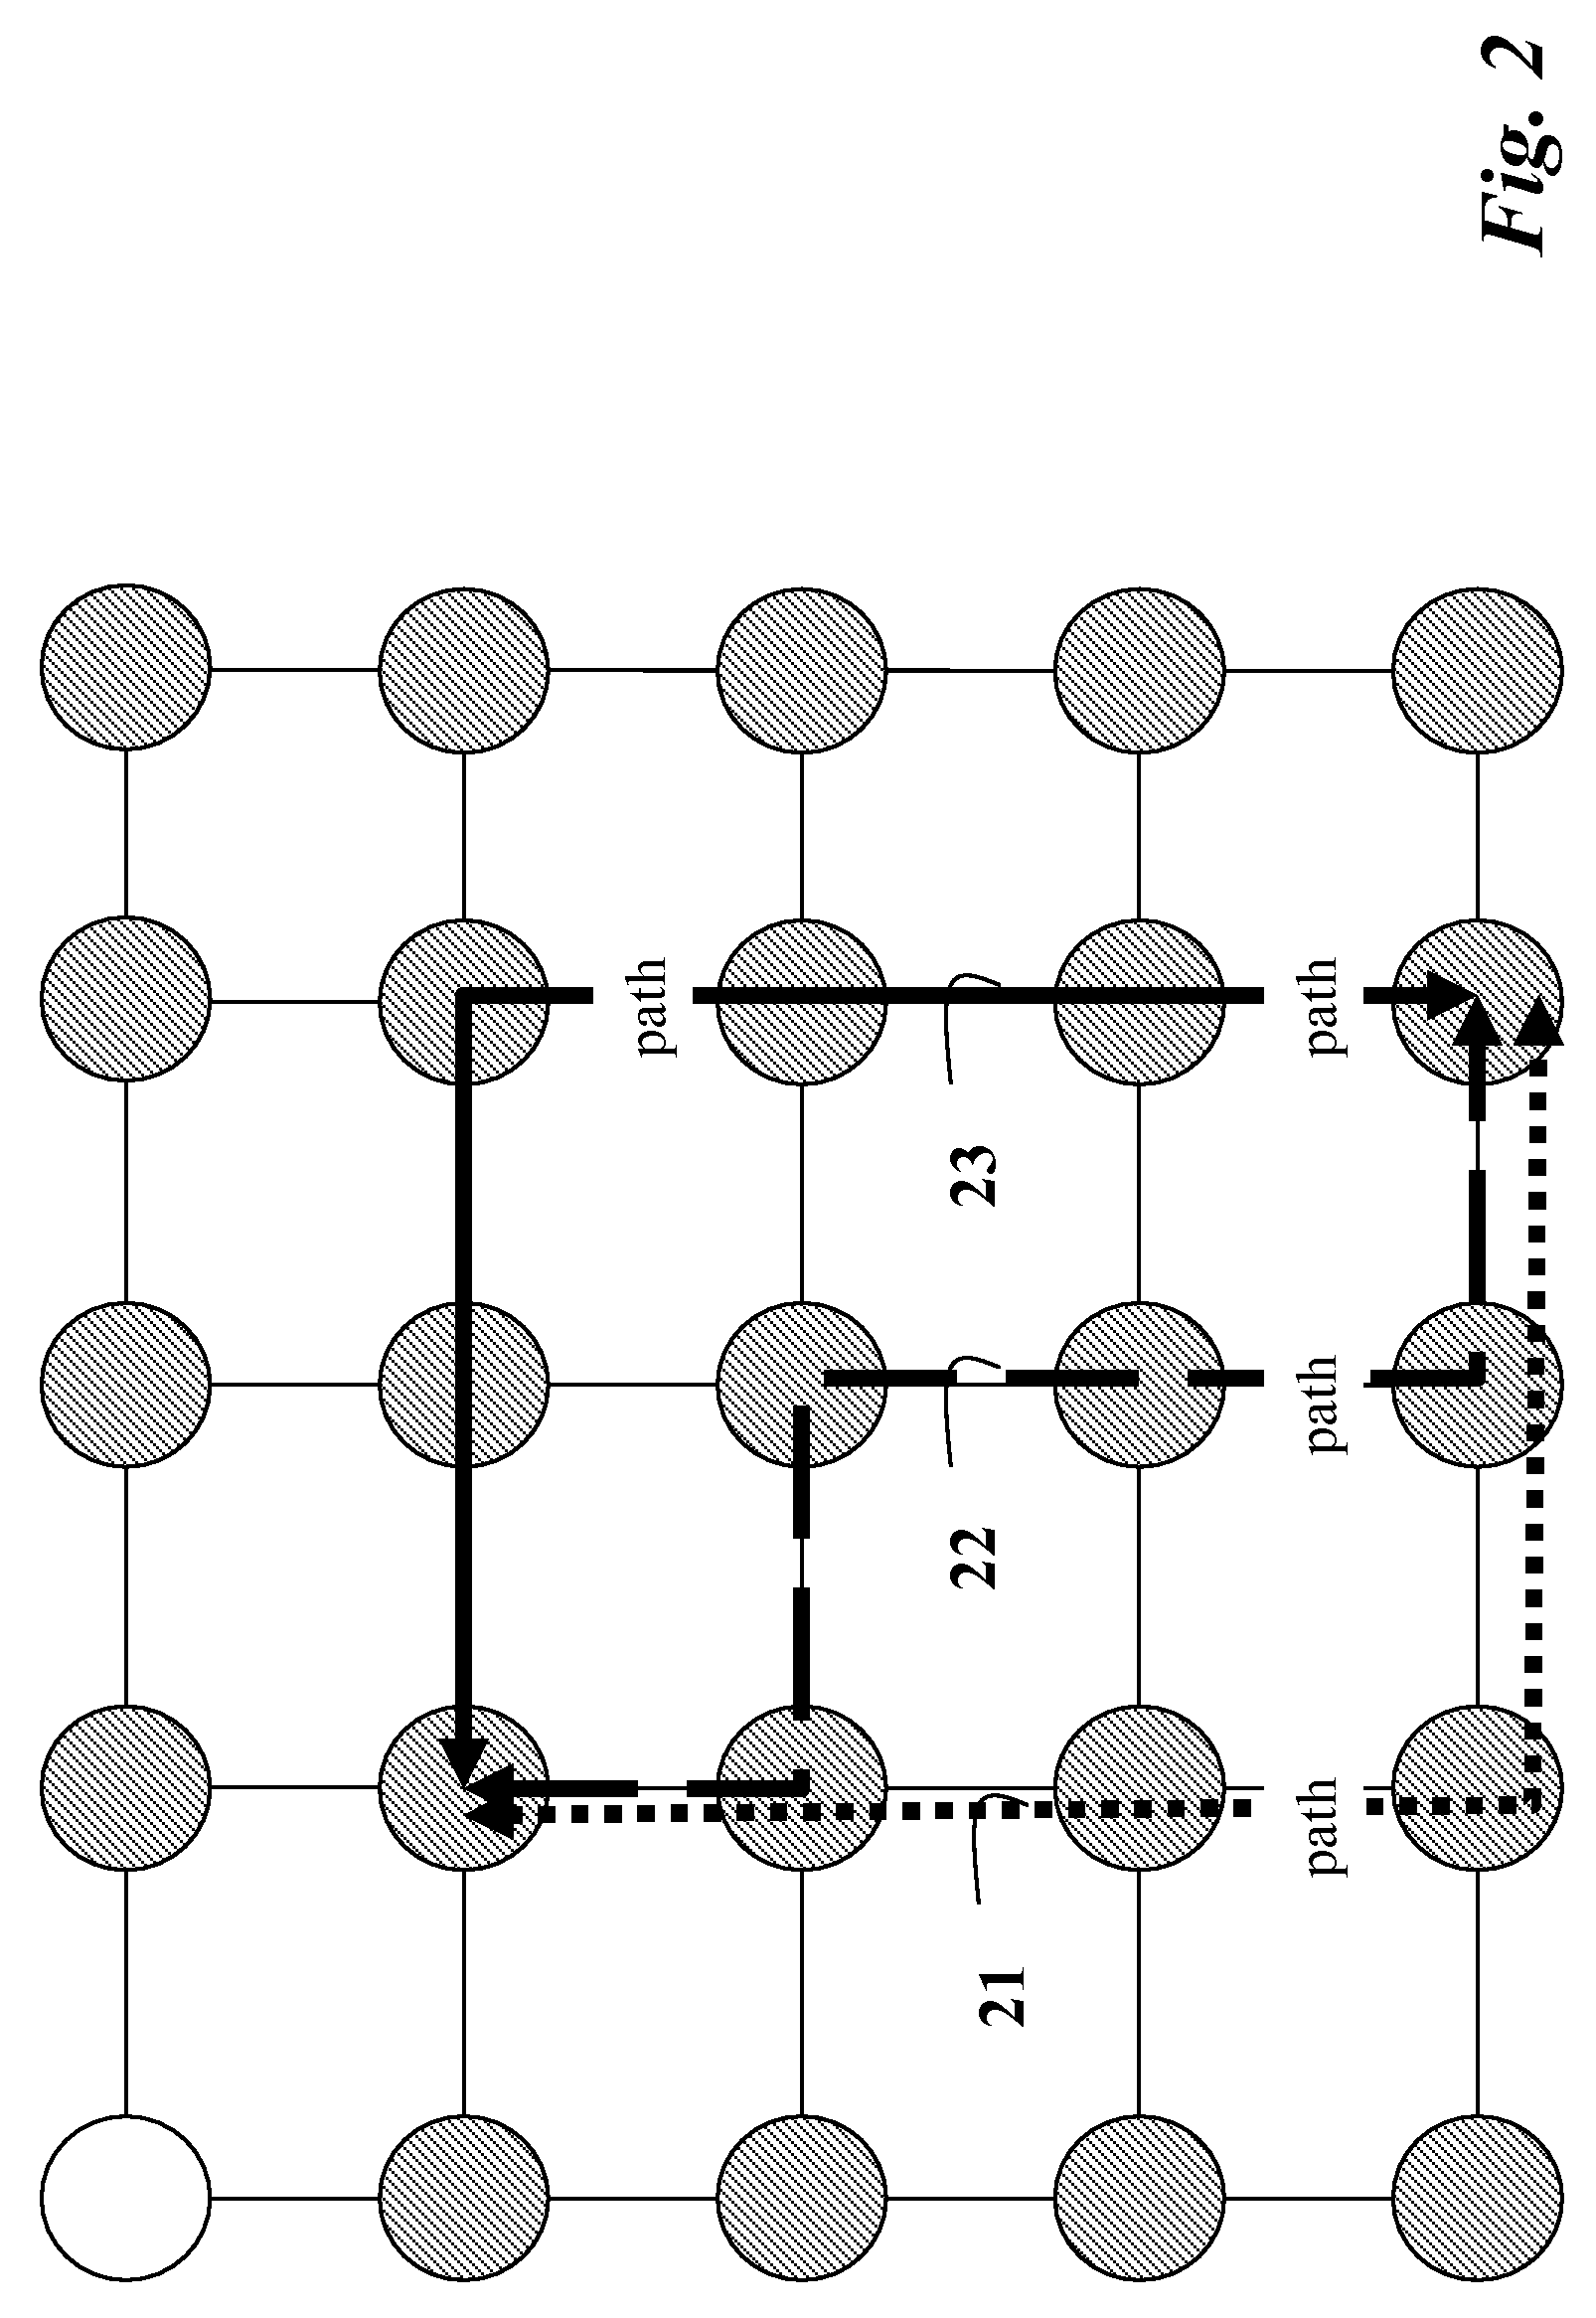 Structured addressing method for wireless networks